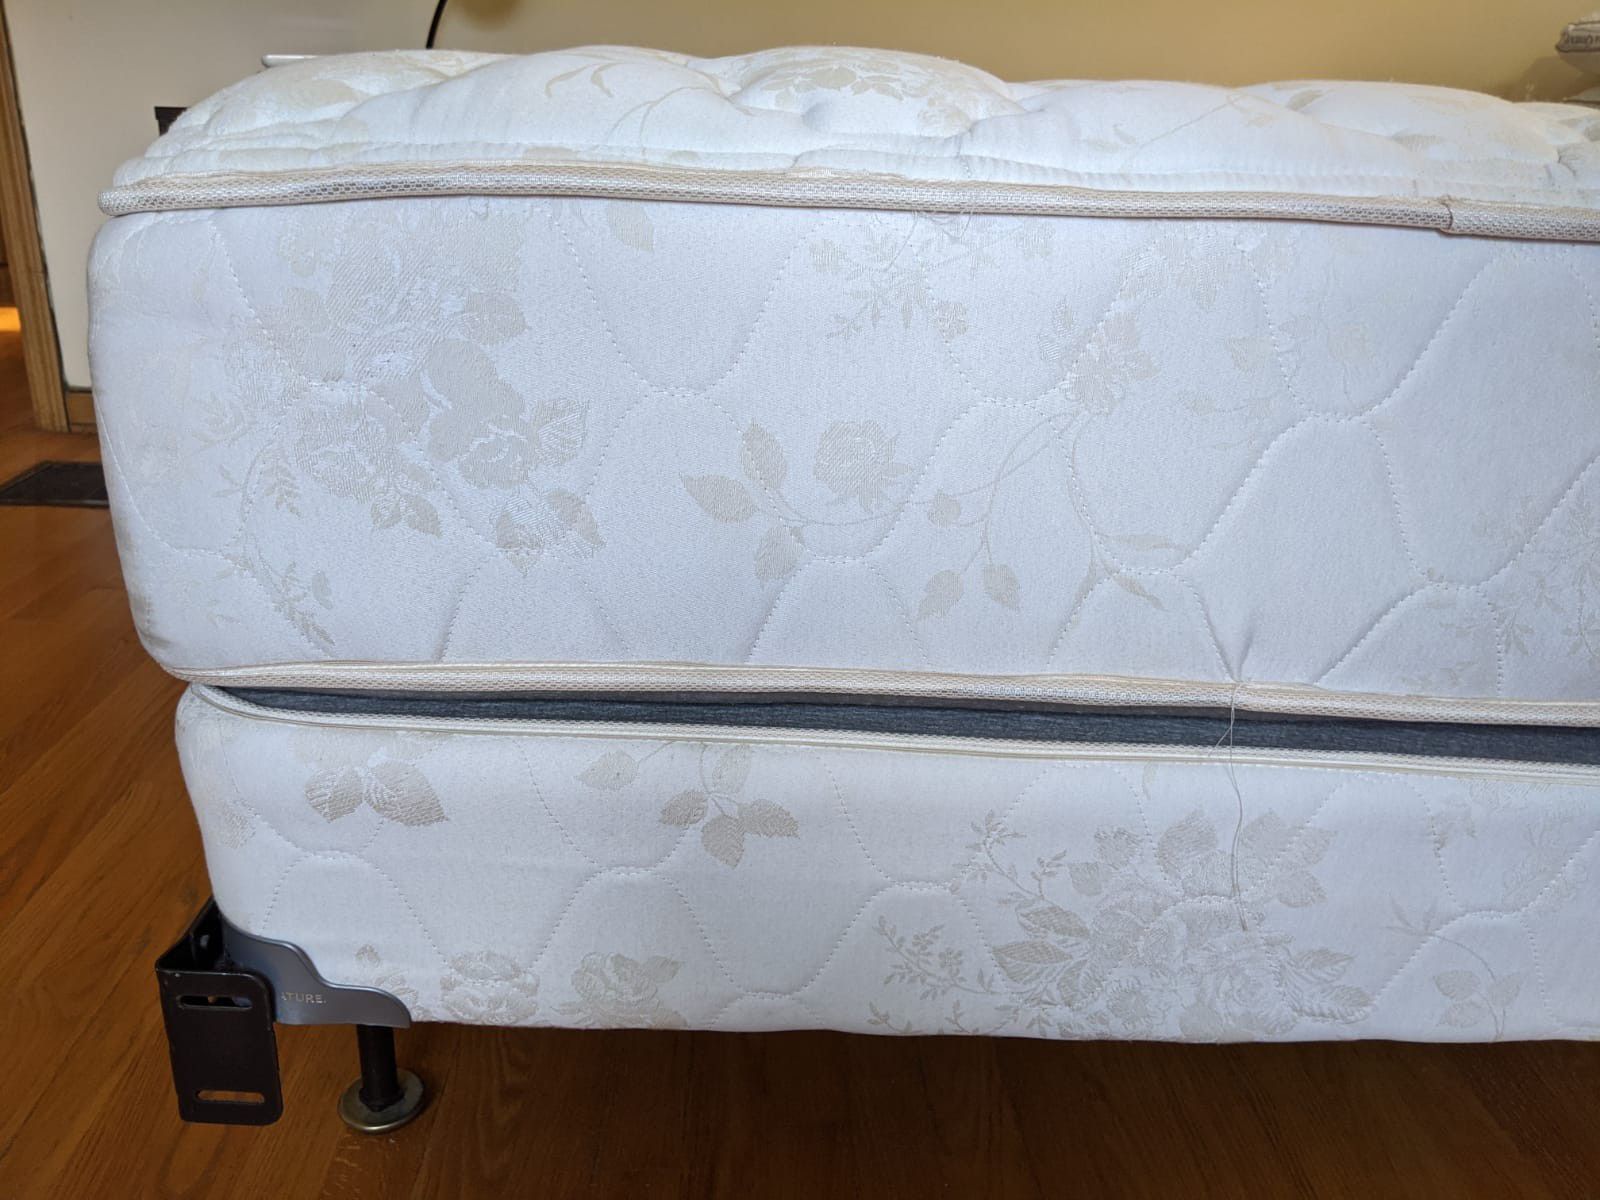 Queen size mattress and bed frame